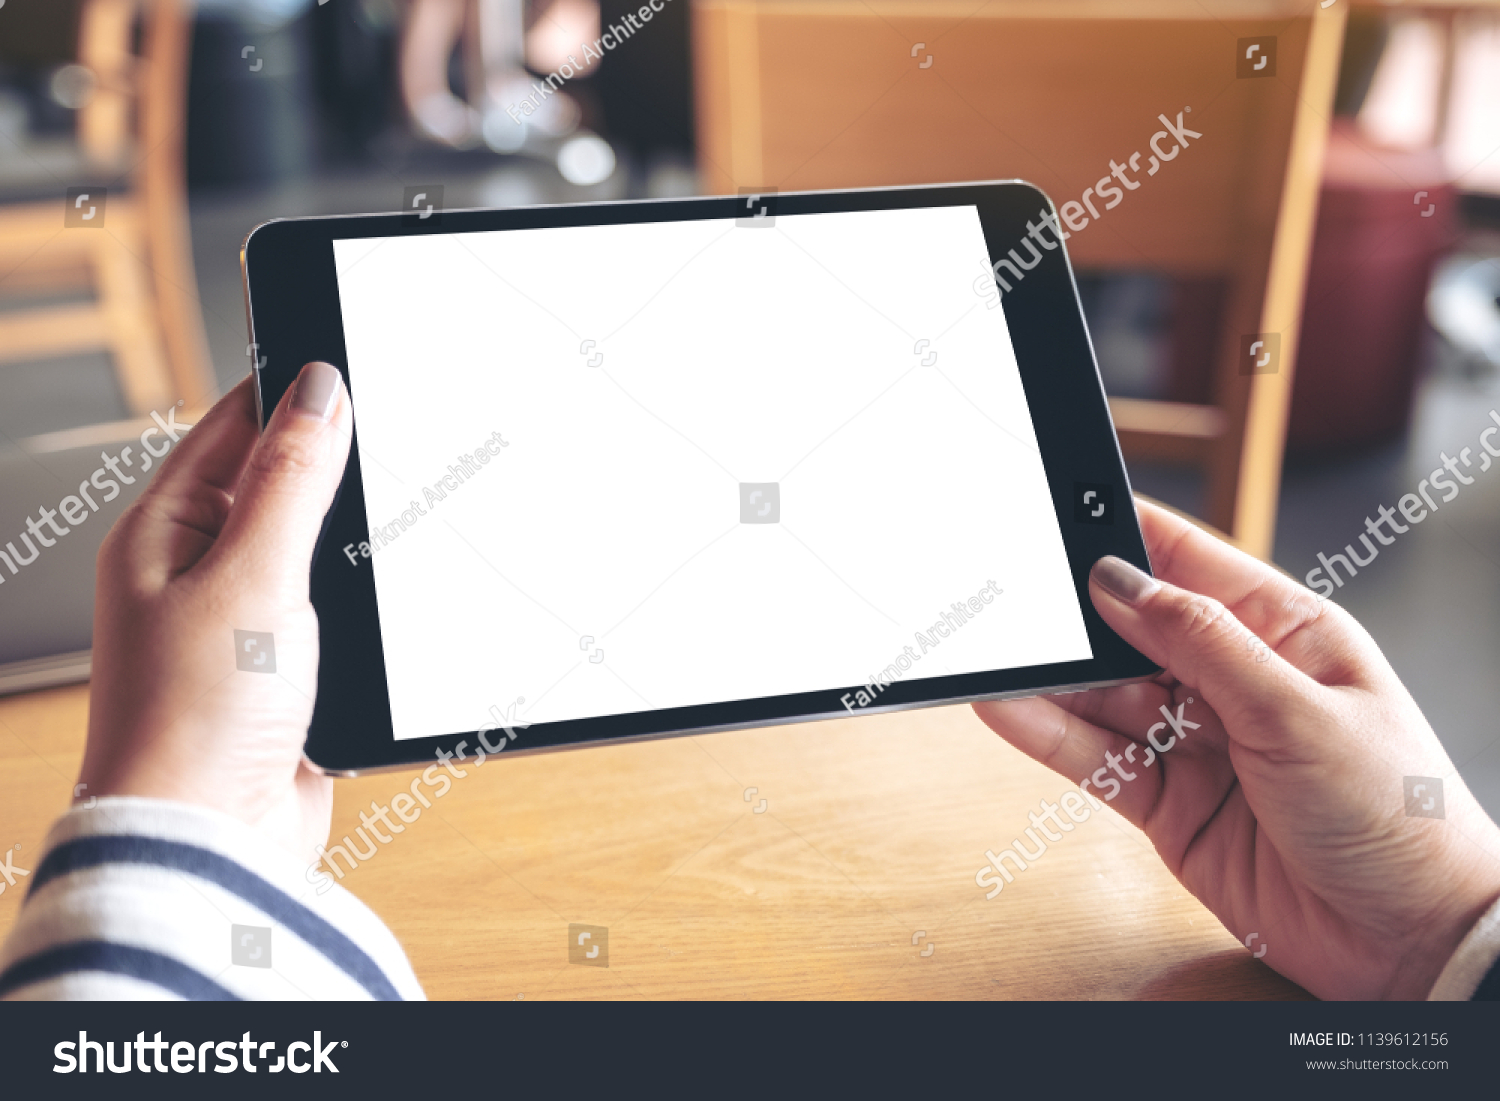 Mockup image of hands holding black tablet pc with blank white desktop screen on wooden table in cafe #1139612156